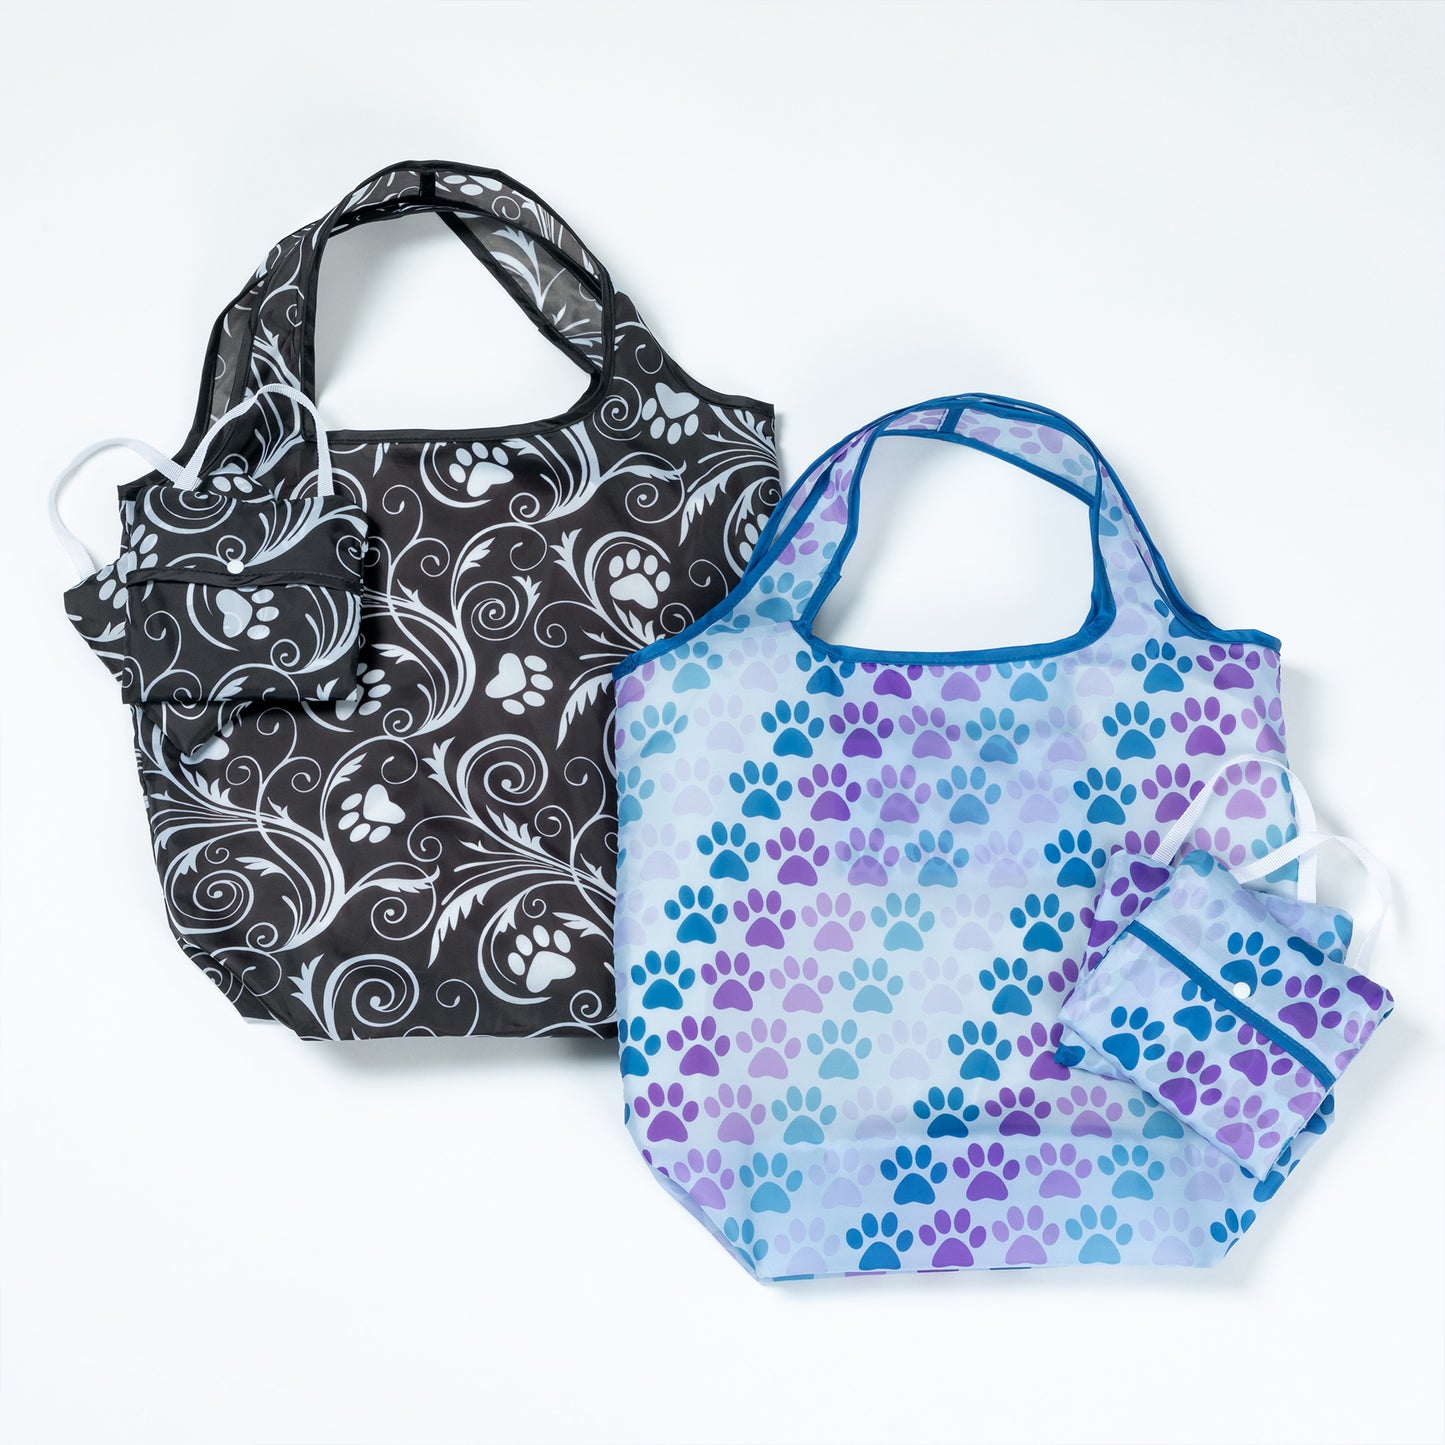 Perfectly Patterned Shopping Totes - Set of 3